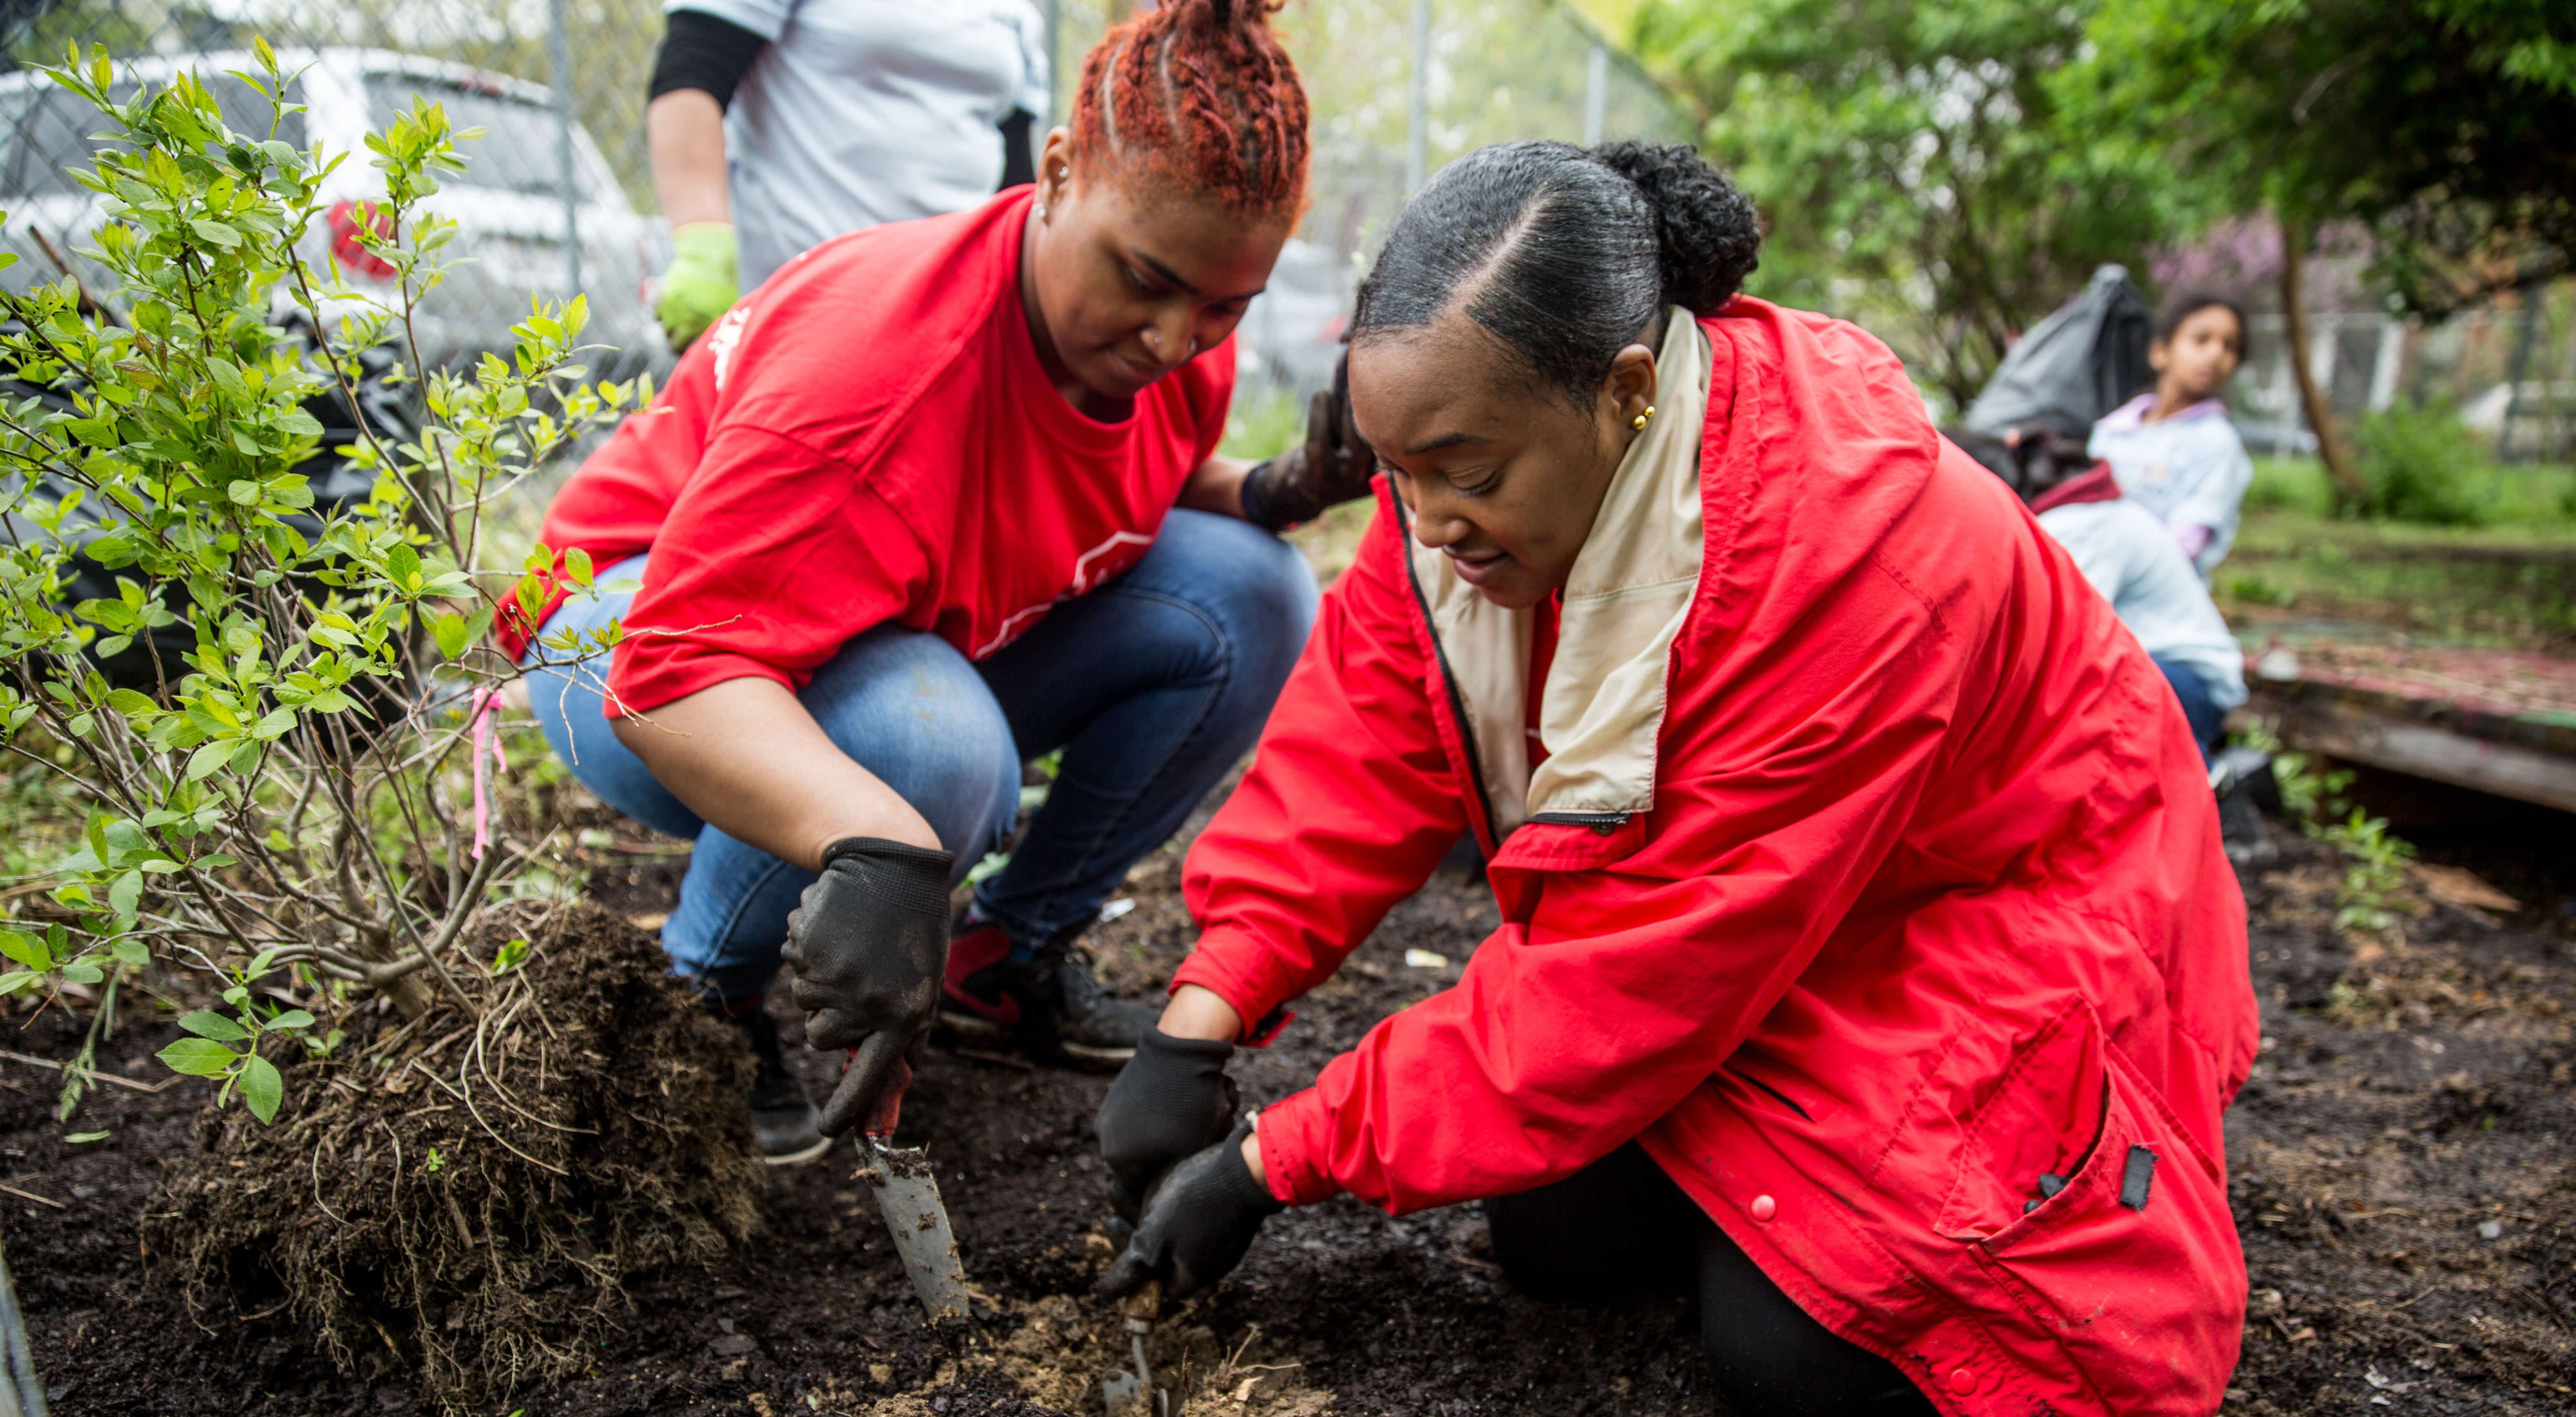 Two women dig in the dirt of a garden.